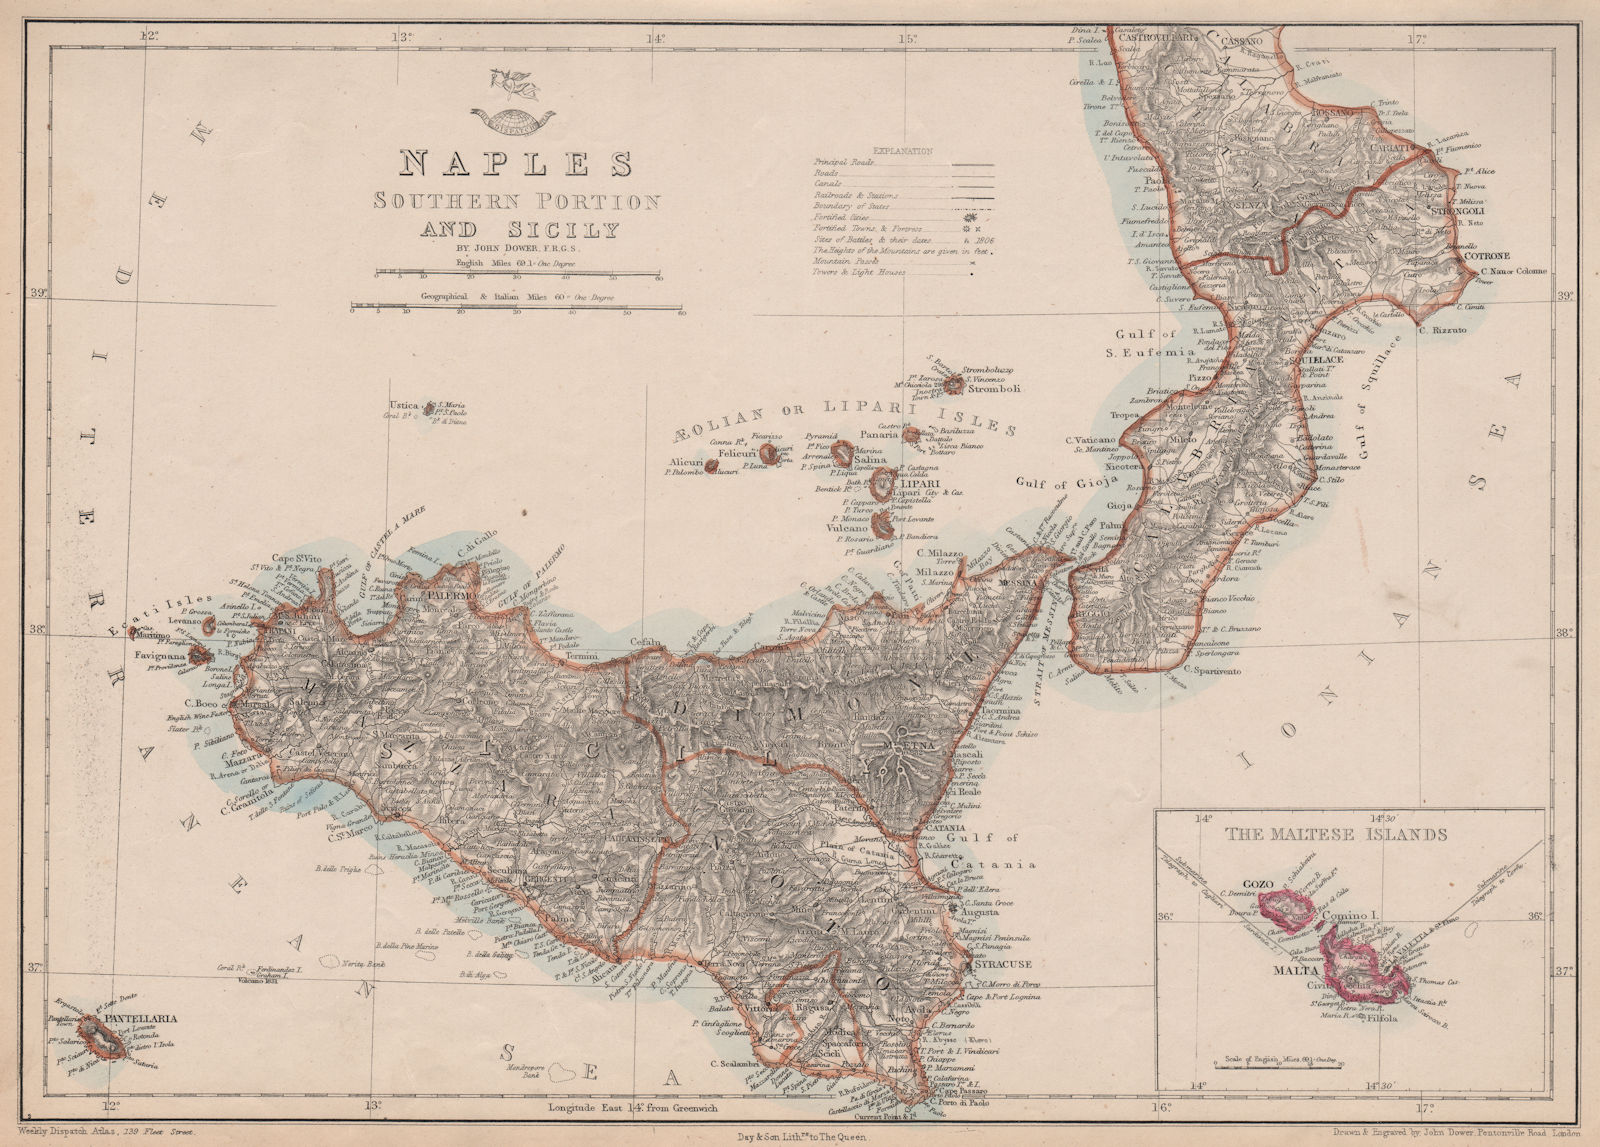 KINGDOM OF NAPLES/TWO SICILIES South. Sicily Malta Italy. DOWER 1863 old map